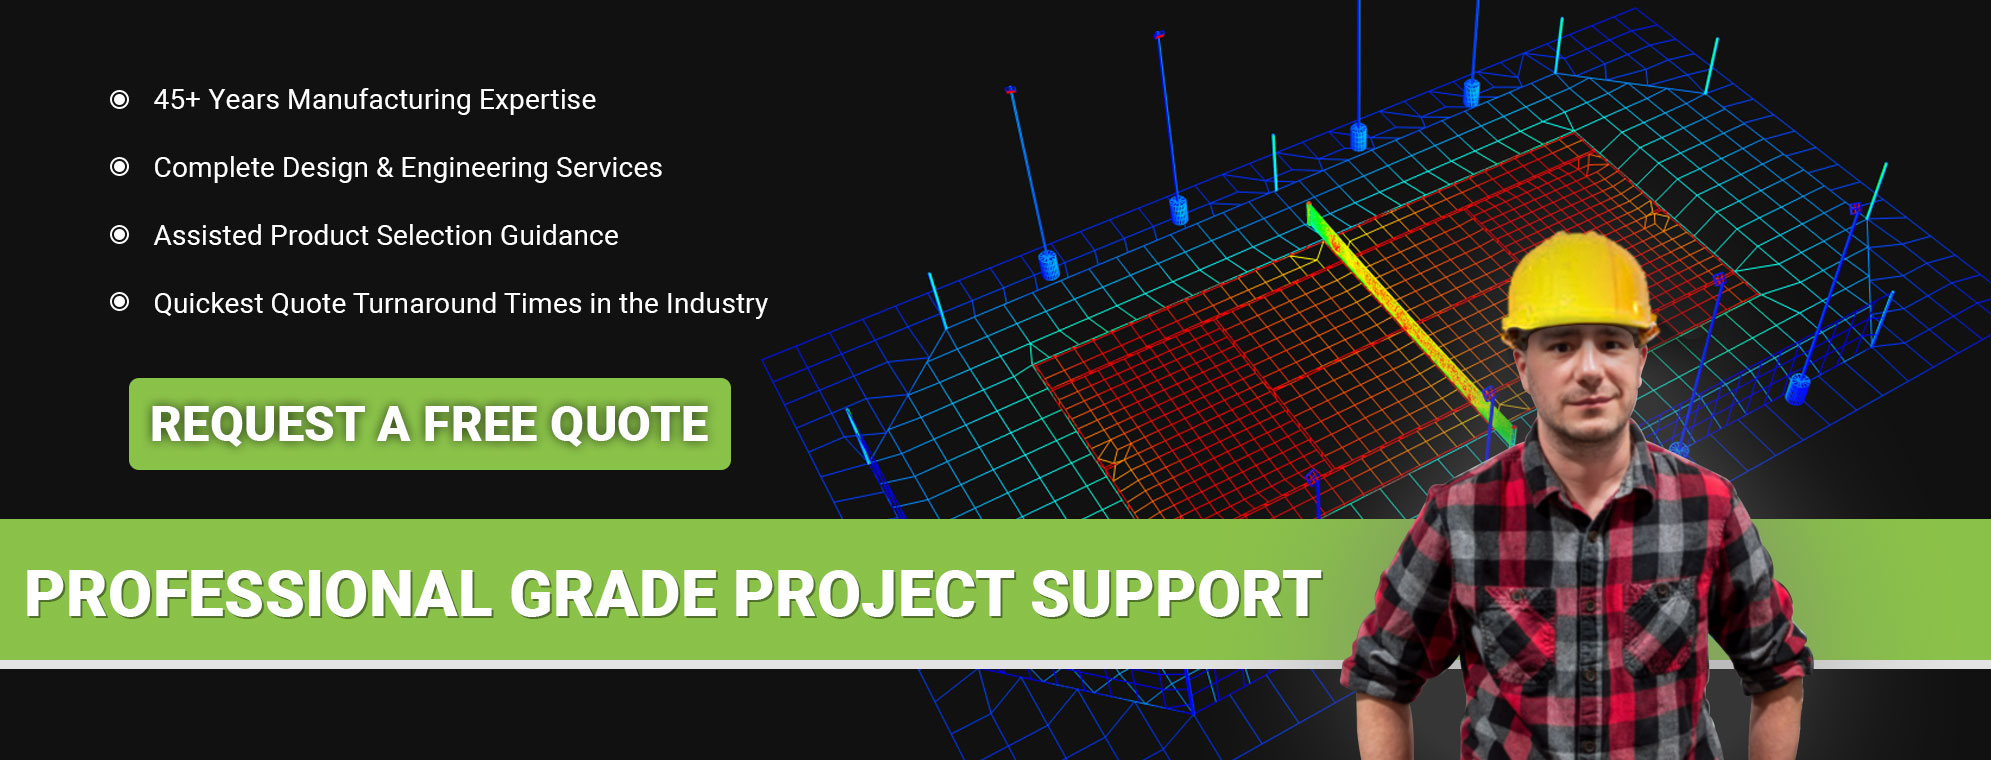 Professional Grade Project Support - Request A Free Quote